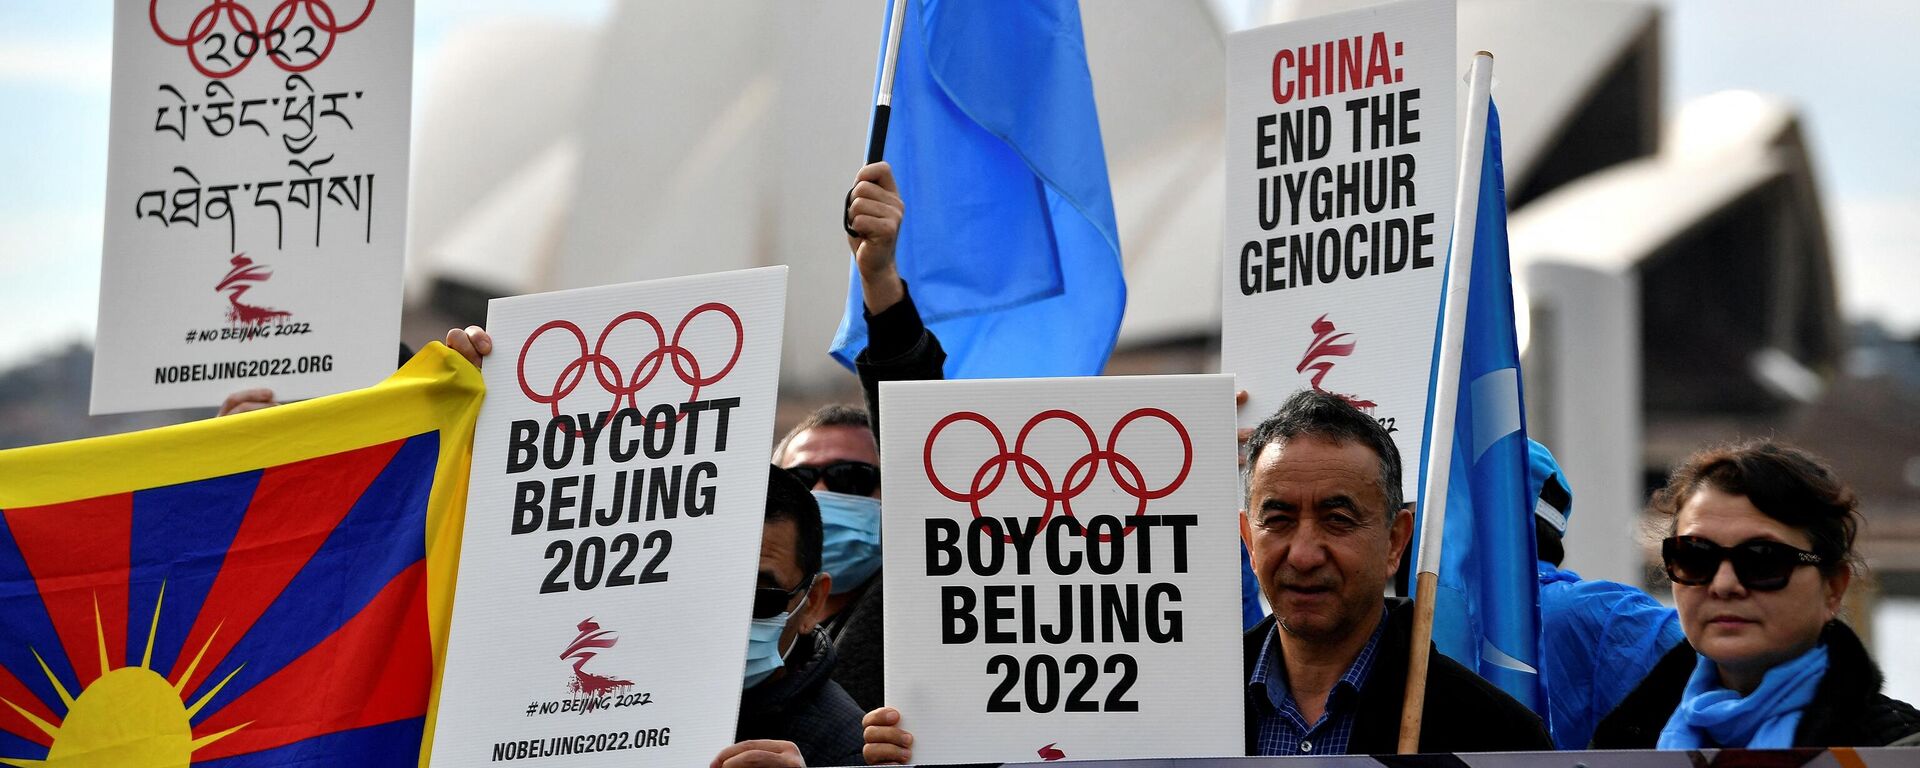 (FILES) In this file photo taken on June 23, 2021 protesters hold up placards and banners as they attend a demonstration in Sydney to call on the Australian government to boycott the 2022 Beijing Winter Olympics over China's human rights record. - Sputnik International, 1920, 08.12.2021